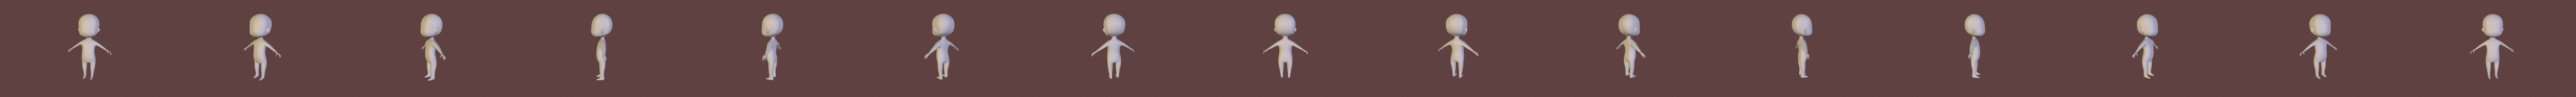 Featured image of post Chibi Base Mesh Free Download Chibi base mesh 3d model available on turbo squid the world s leading provider of digital 3d models for visualization films television and games